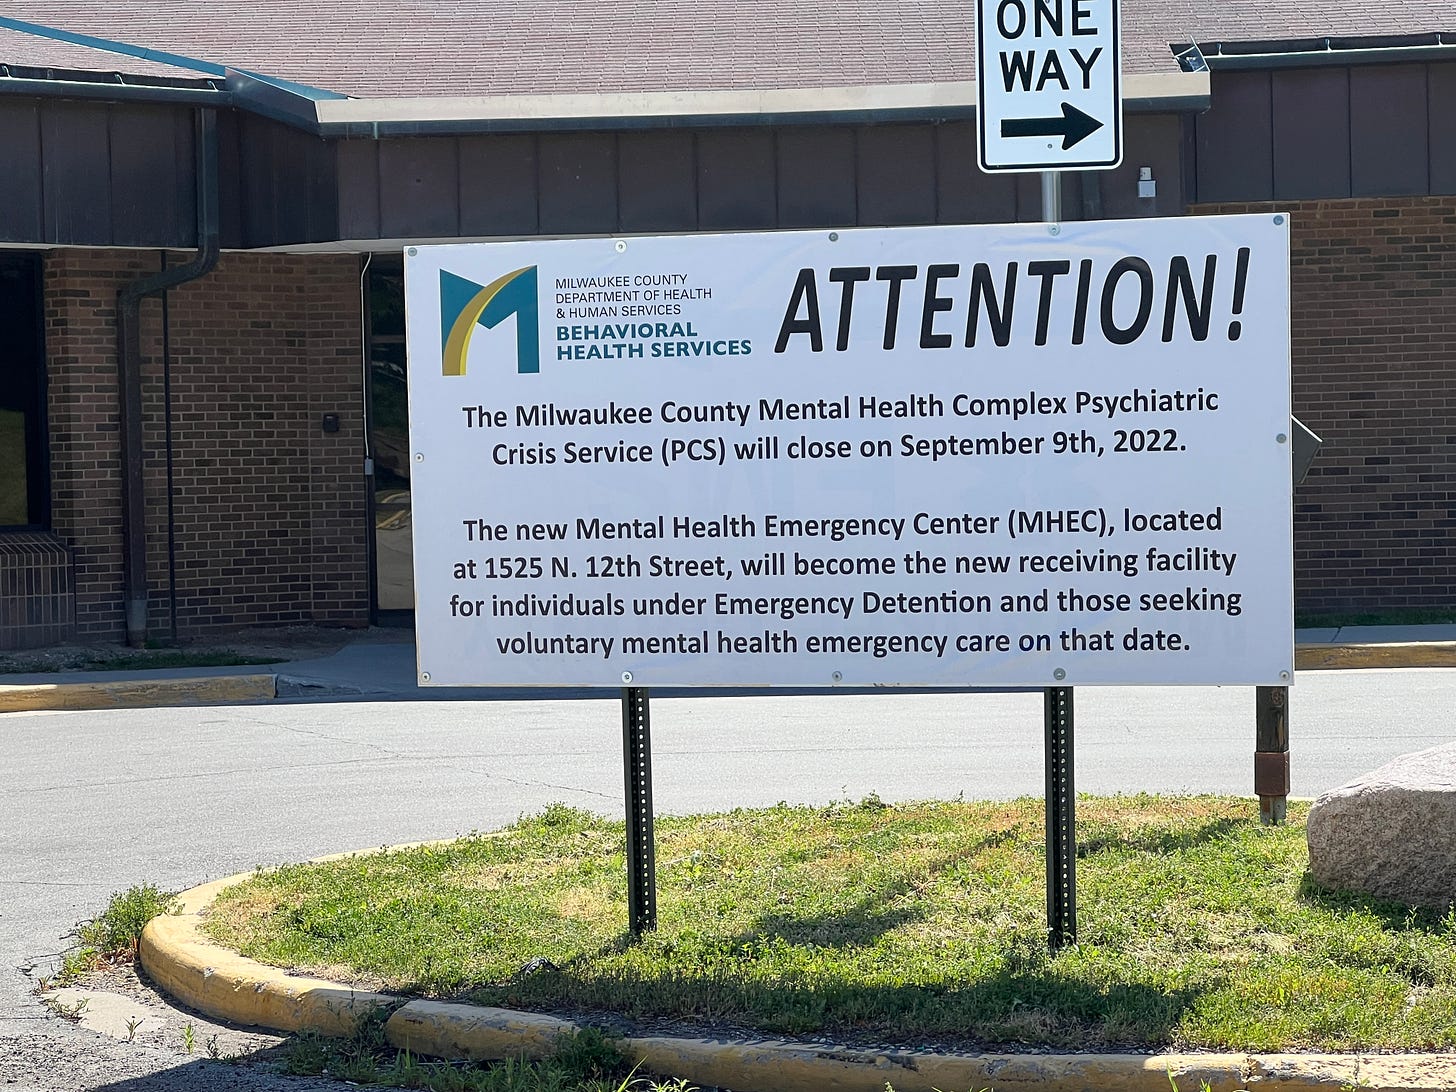 Image is of a sign in front of the Psychiatric Crisis Service (PCS) saying "Attention/The Milwaukee County Mental Health Complex Psychiatric Crisis Service will close on September 9th, 2022. The new Mental Health Emergency Center (MHEC), located at 1525 N. 12th. Street, will become the new receiving facility for individuals under Emergency Detention and those seeking voluntary mental health emergency care on that date."